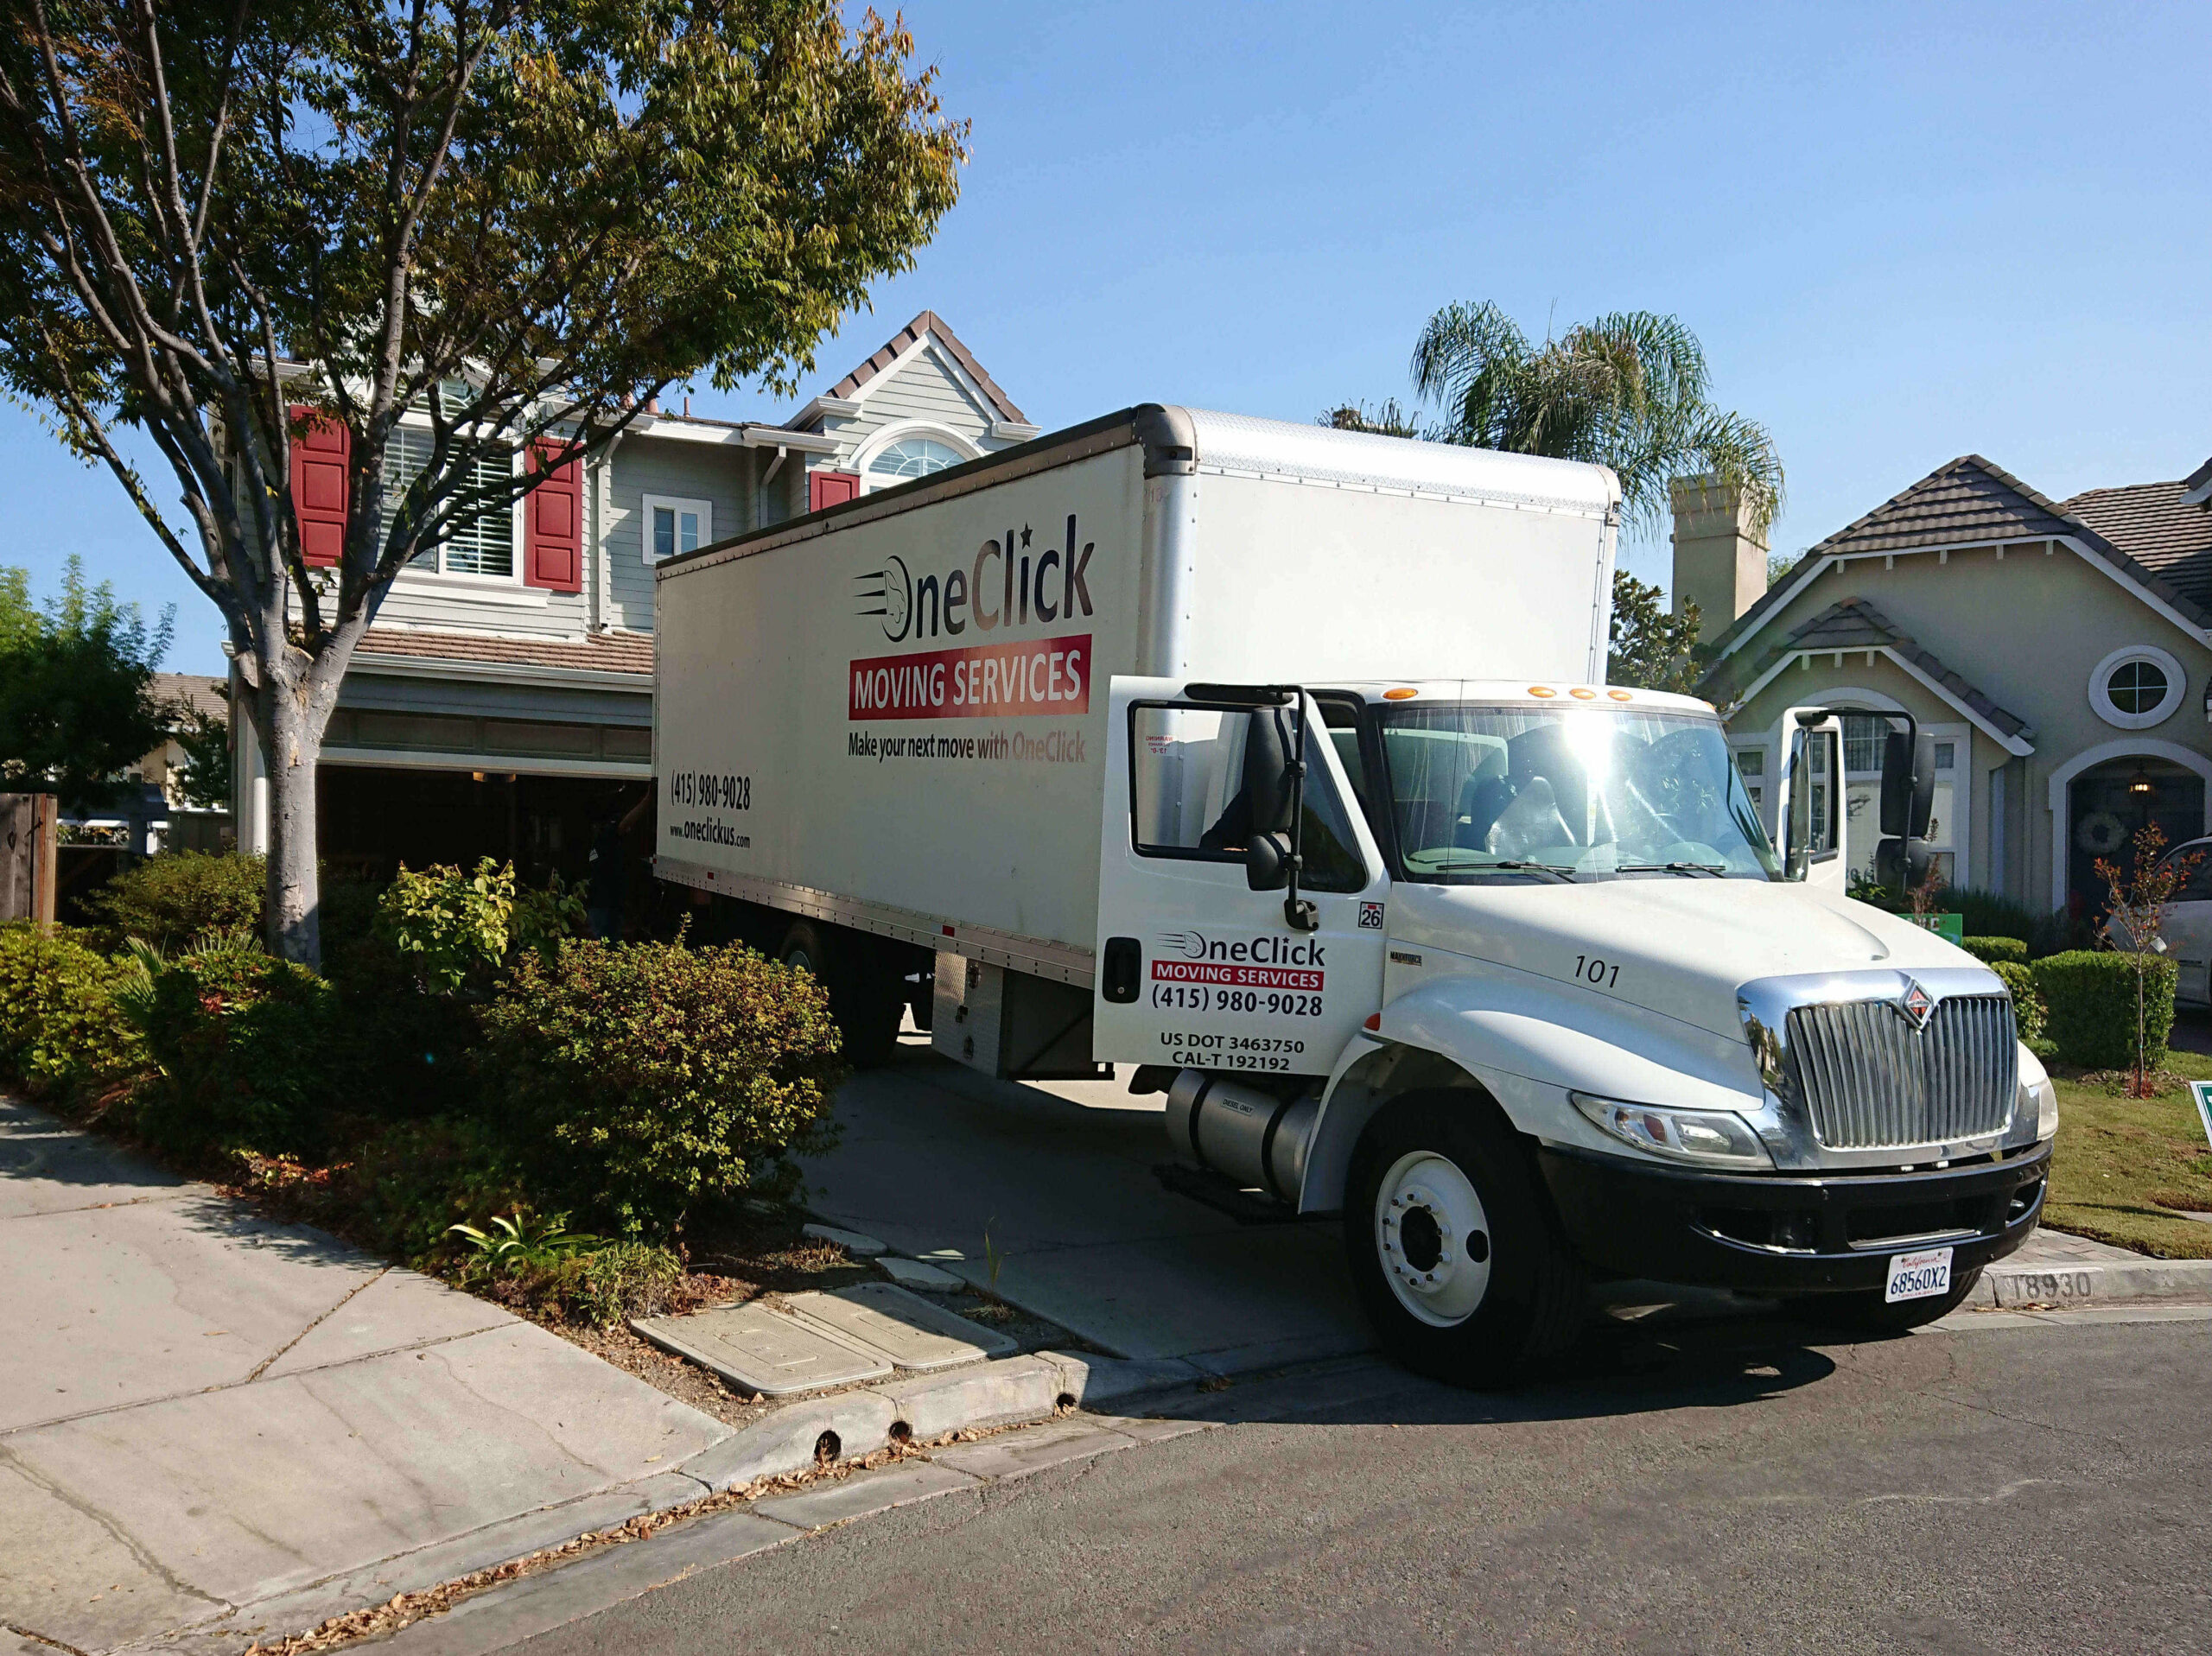 movers-near-me-movers-local-movers-moving-company-best-movers-affordable-movers-movers-oneclick-movers-california-moving-services-moving-services-near-me-residential-movers-moving-day